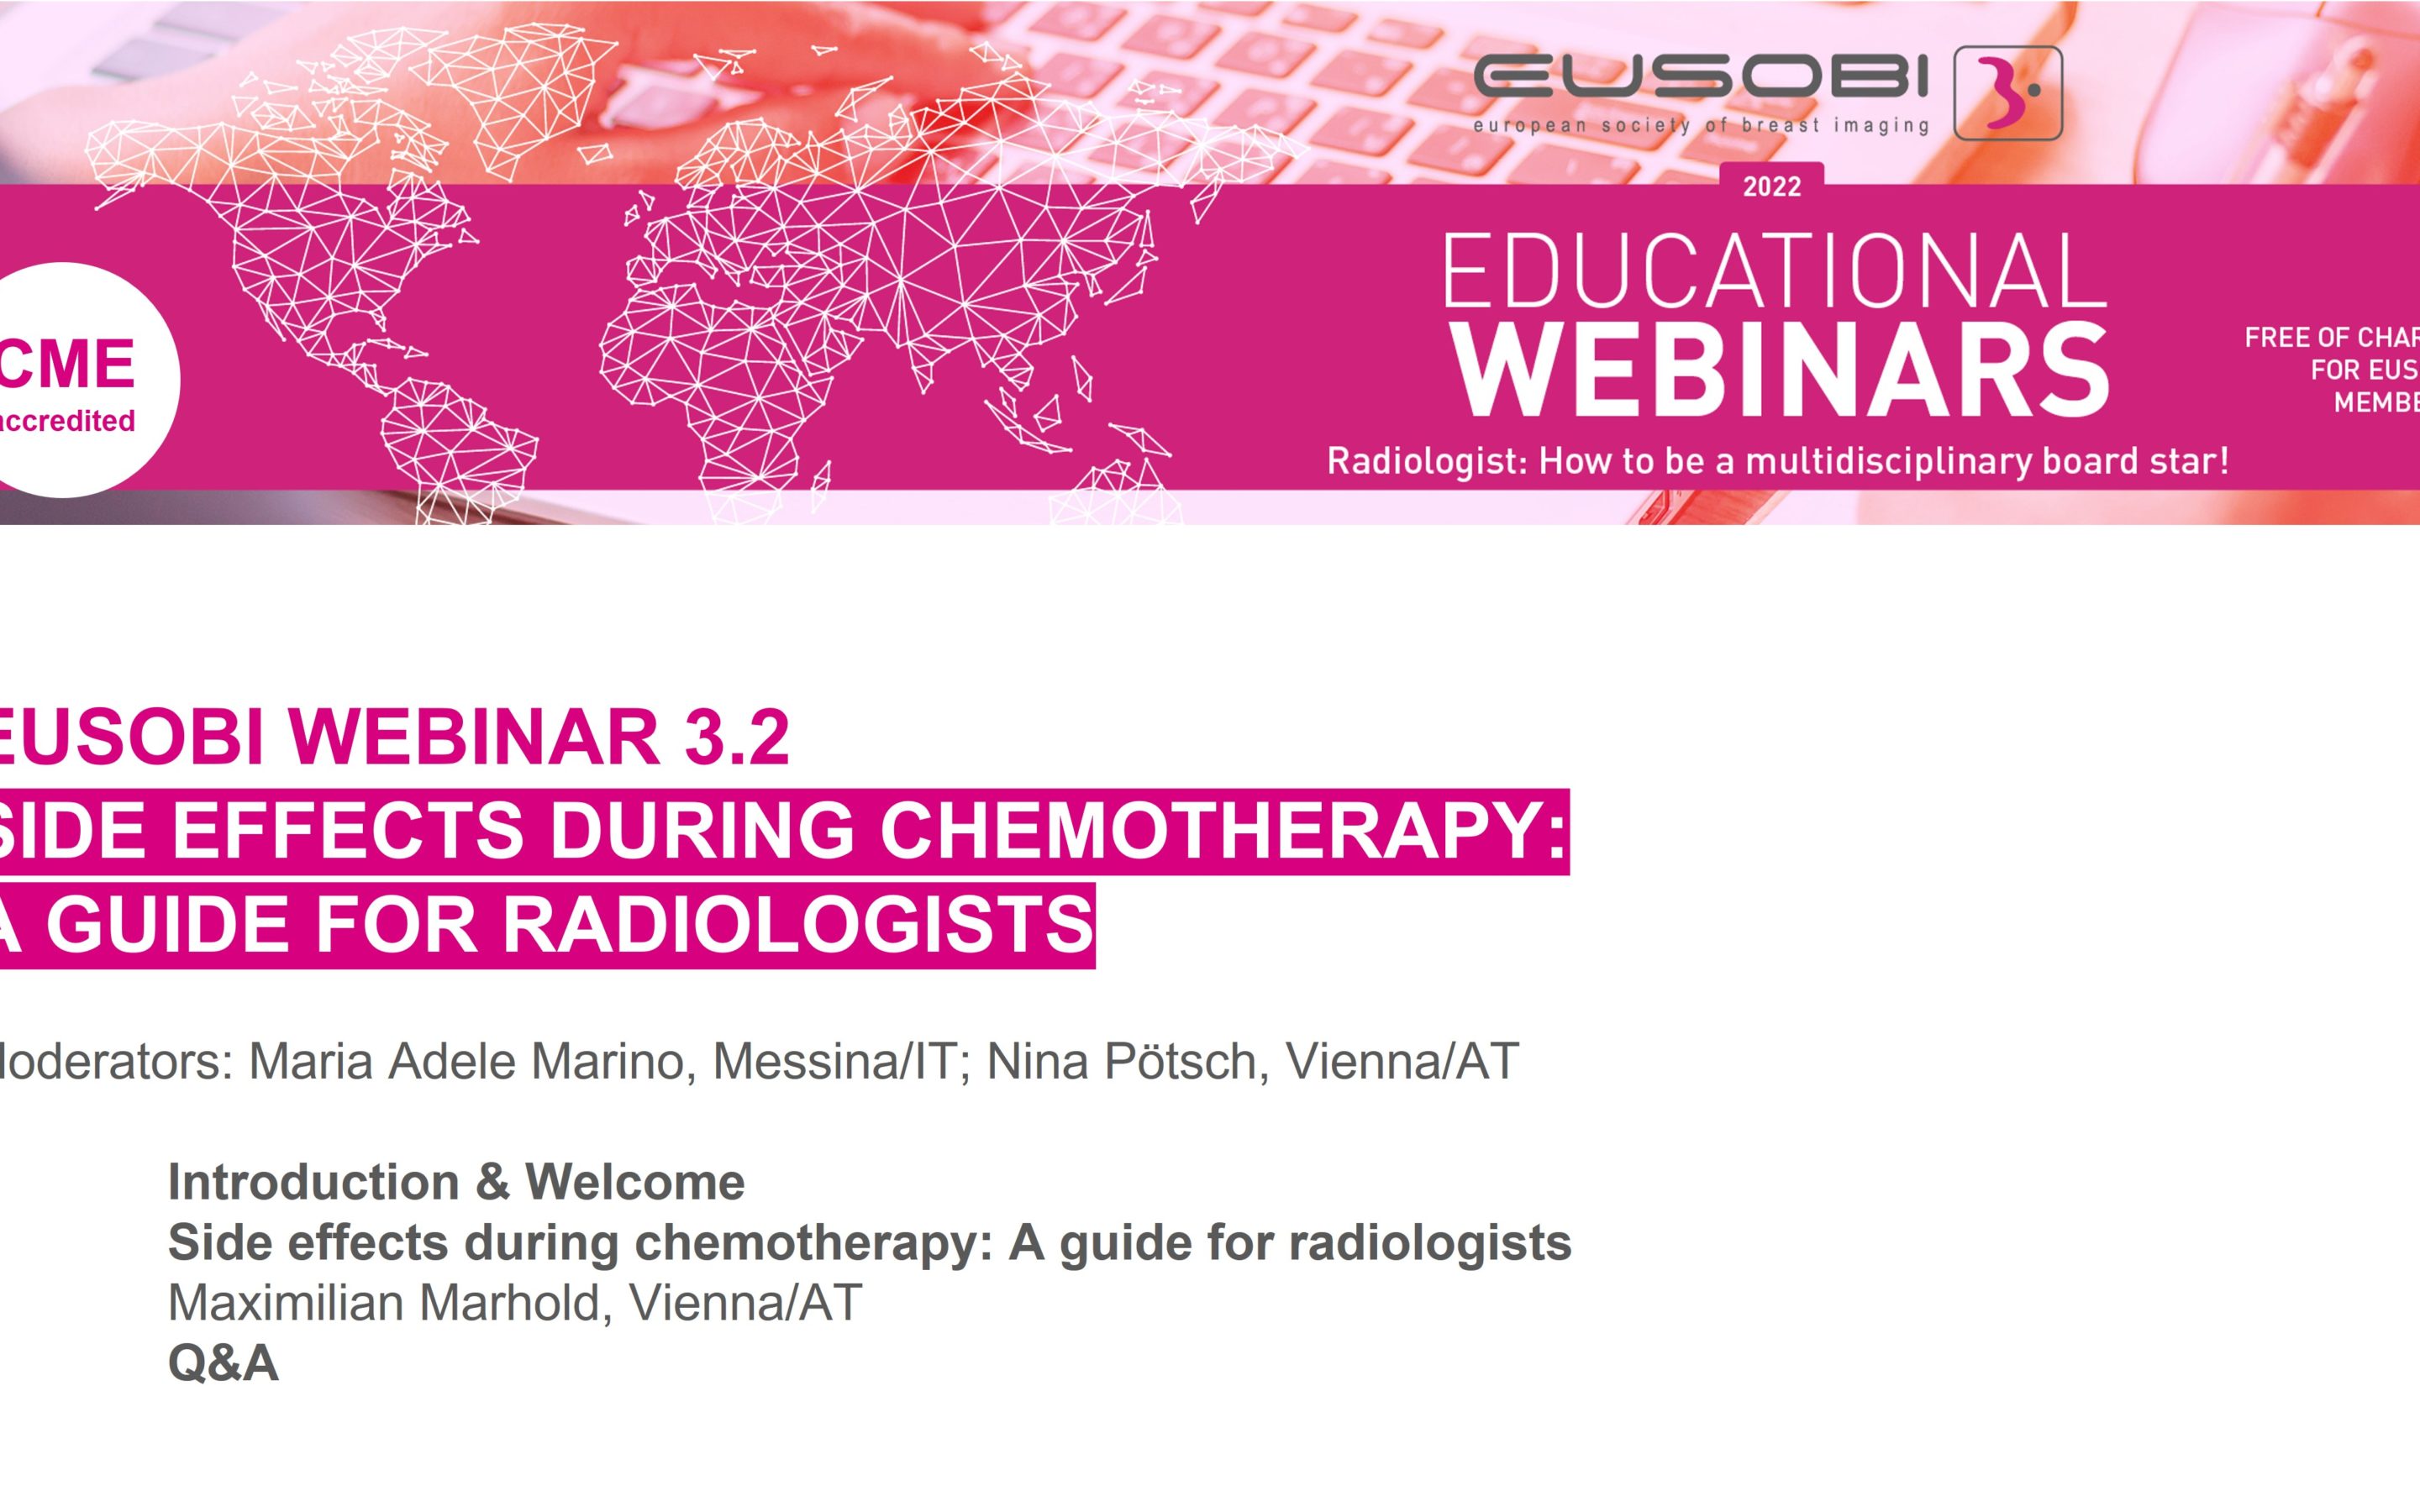 3.2 / Side effects during chemotherapy: A guide for radiologists